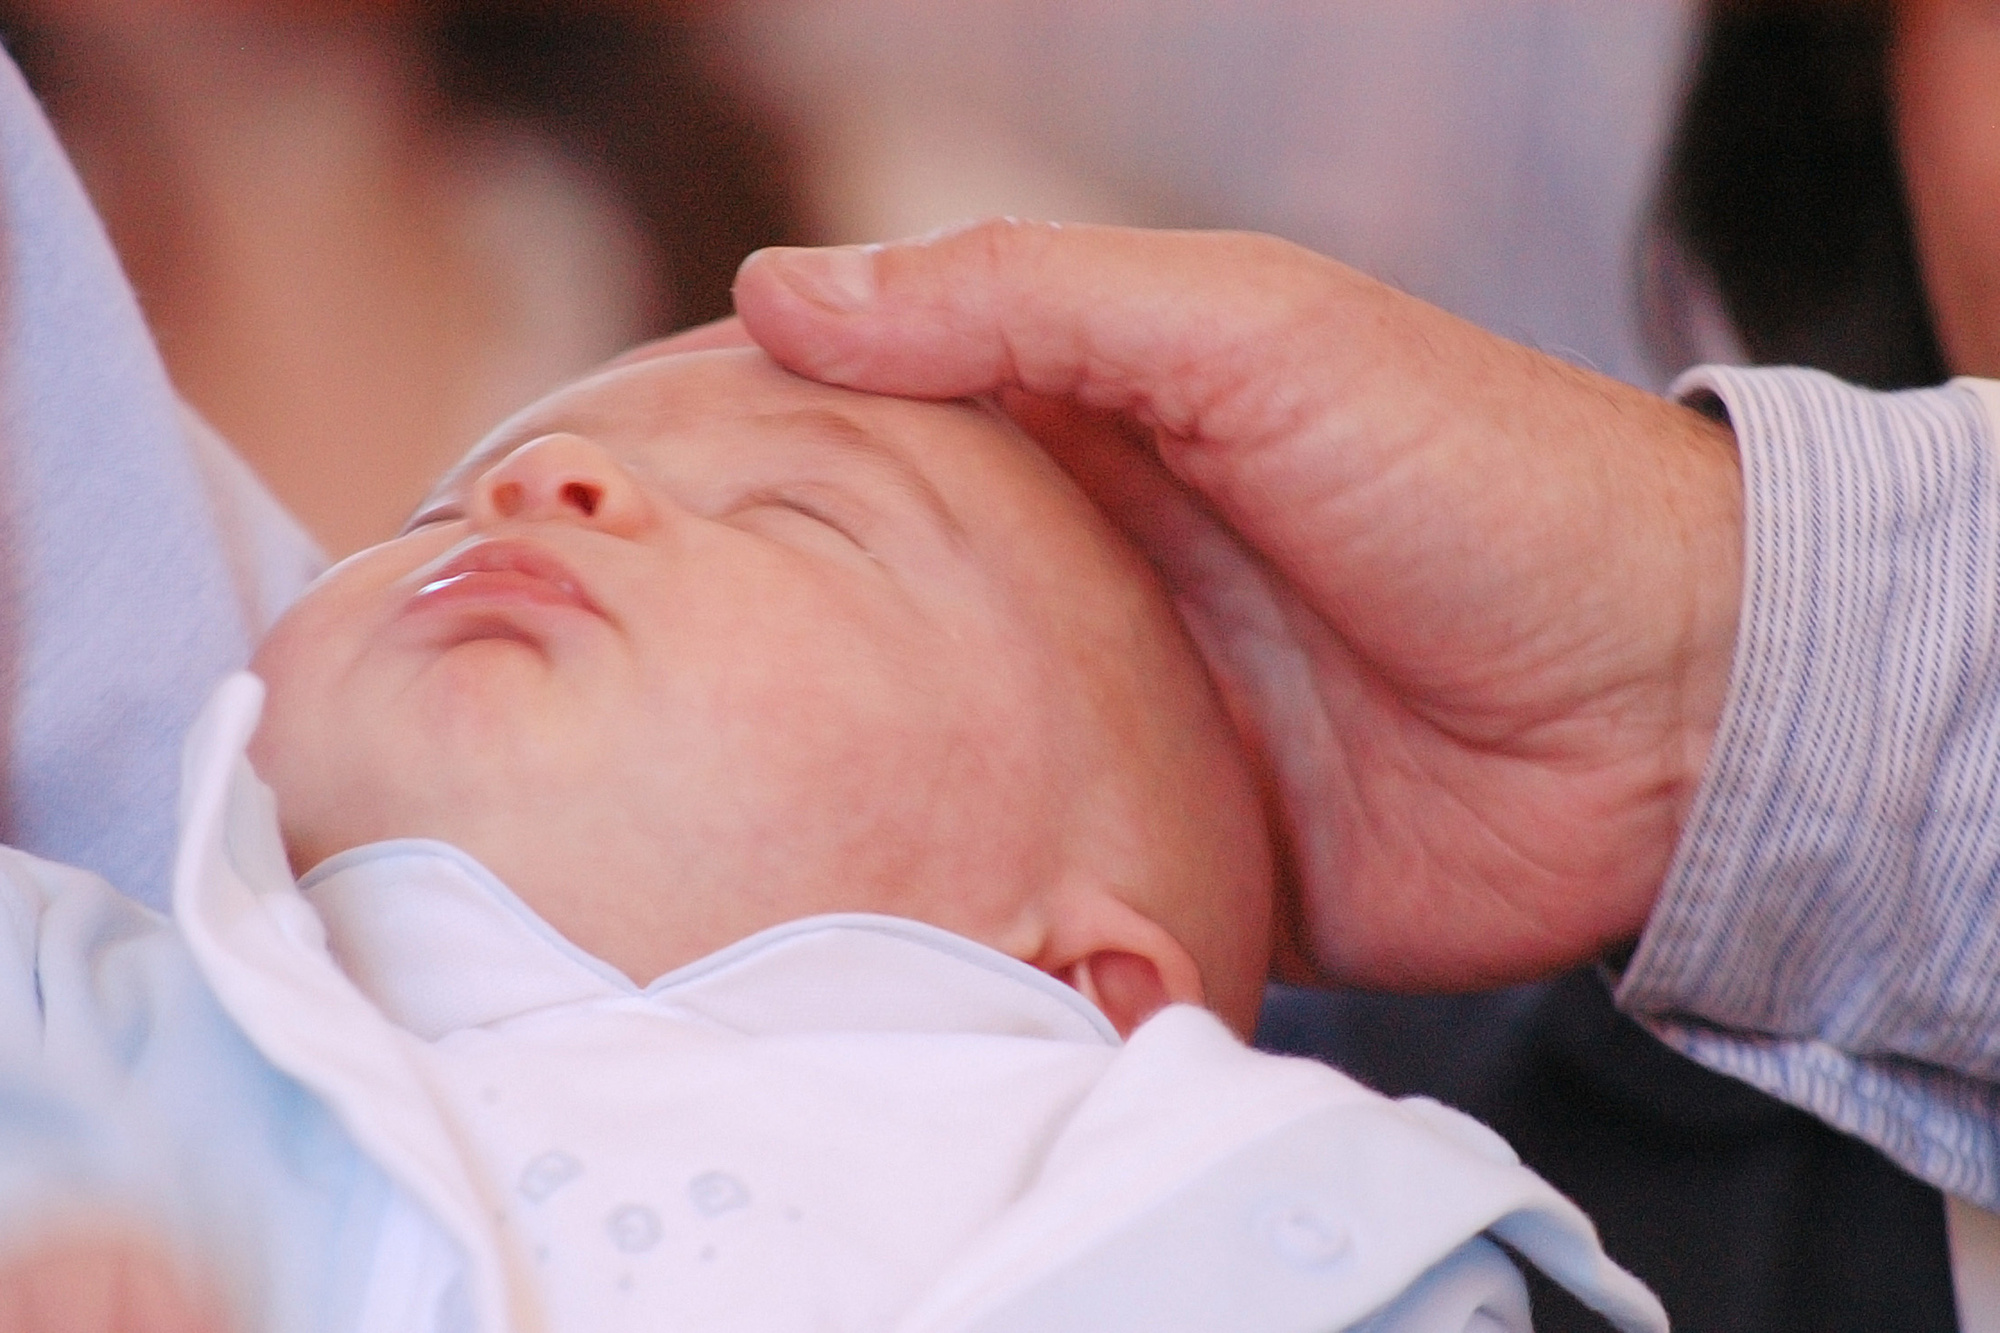 infant-baptism-5-reasons-to-baptize-your-baby-even-if-you-are-not